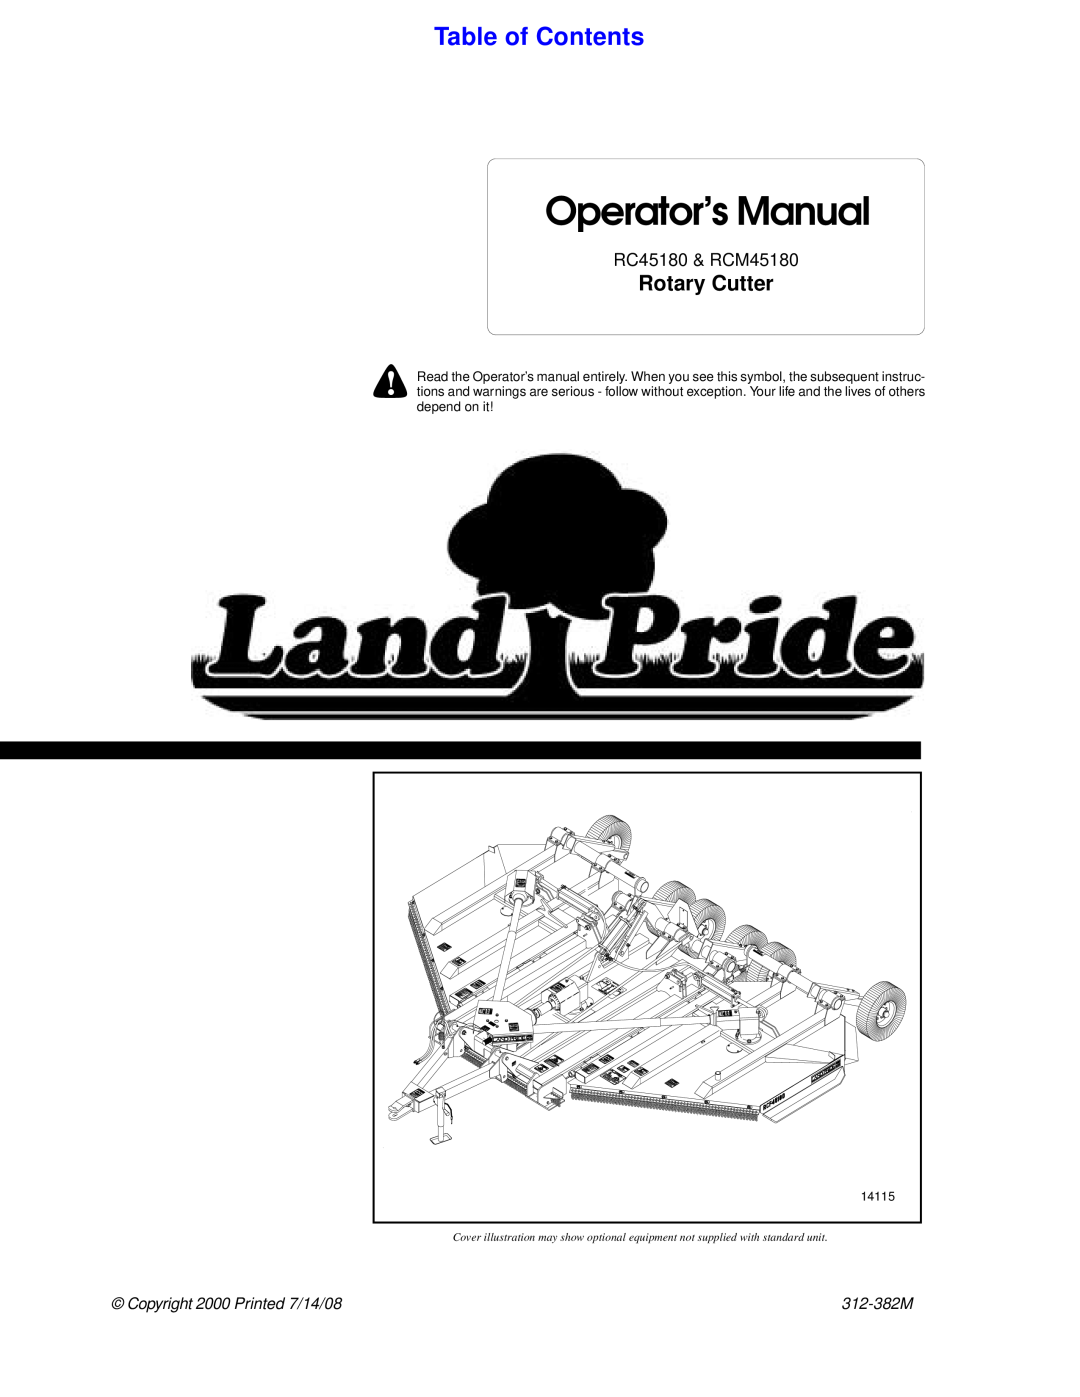 Land Pride RCM45180 manual Table of Contents, Rotary Cutter, Operator’s Manual, Copyright 2000 Pr inted 7/14/08, 312-382M 